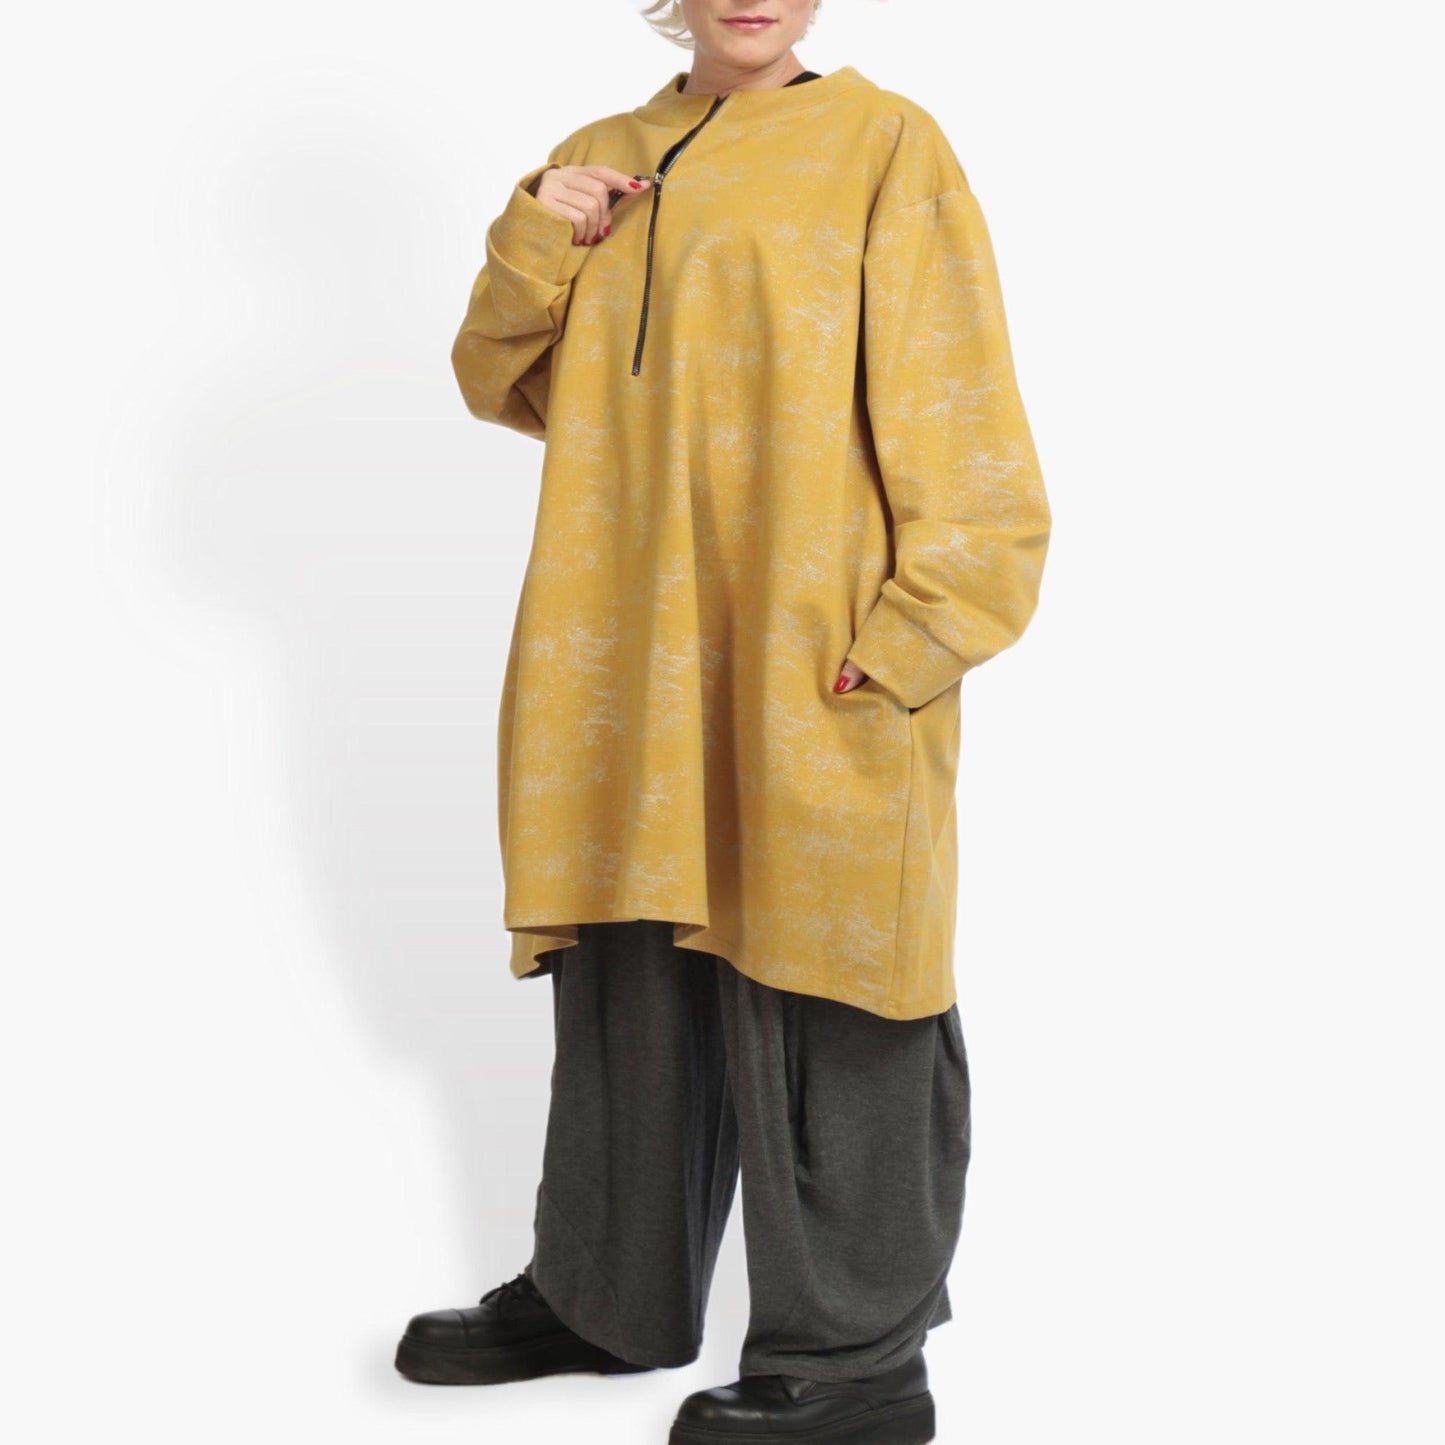 Winter big shirt in a boxy shape made of Romanit jersey quality, Lilo in mustard